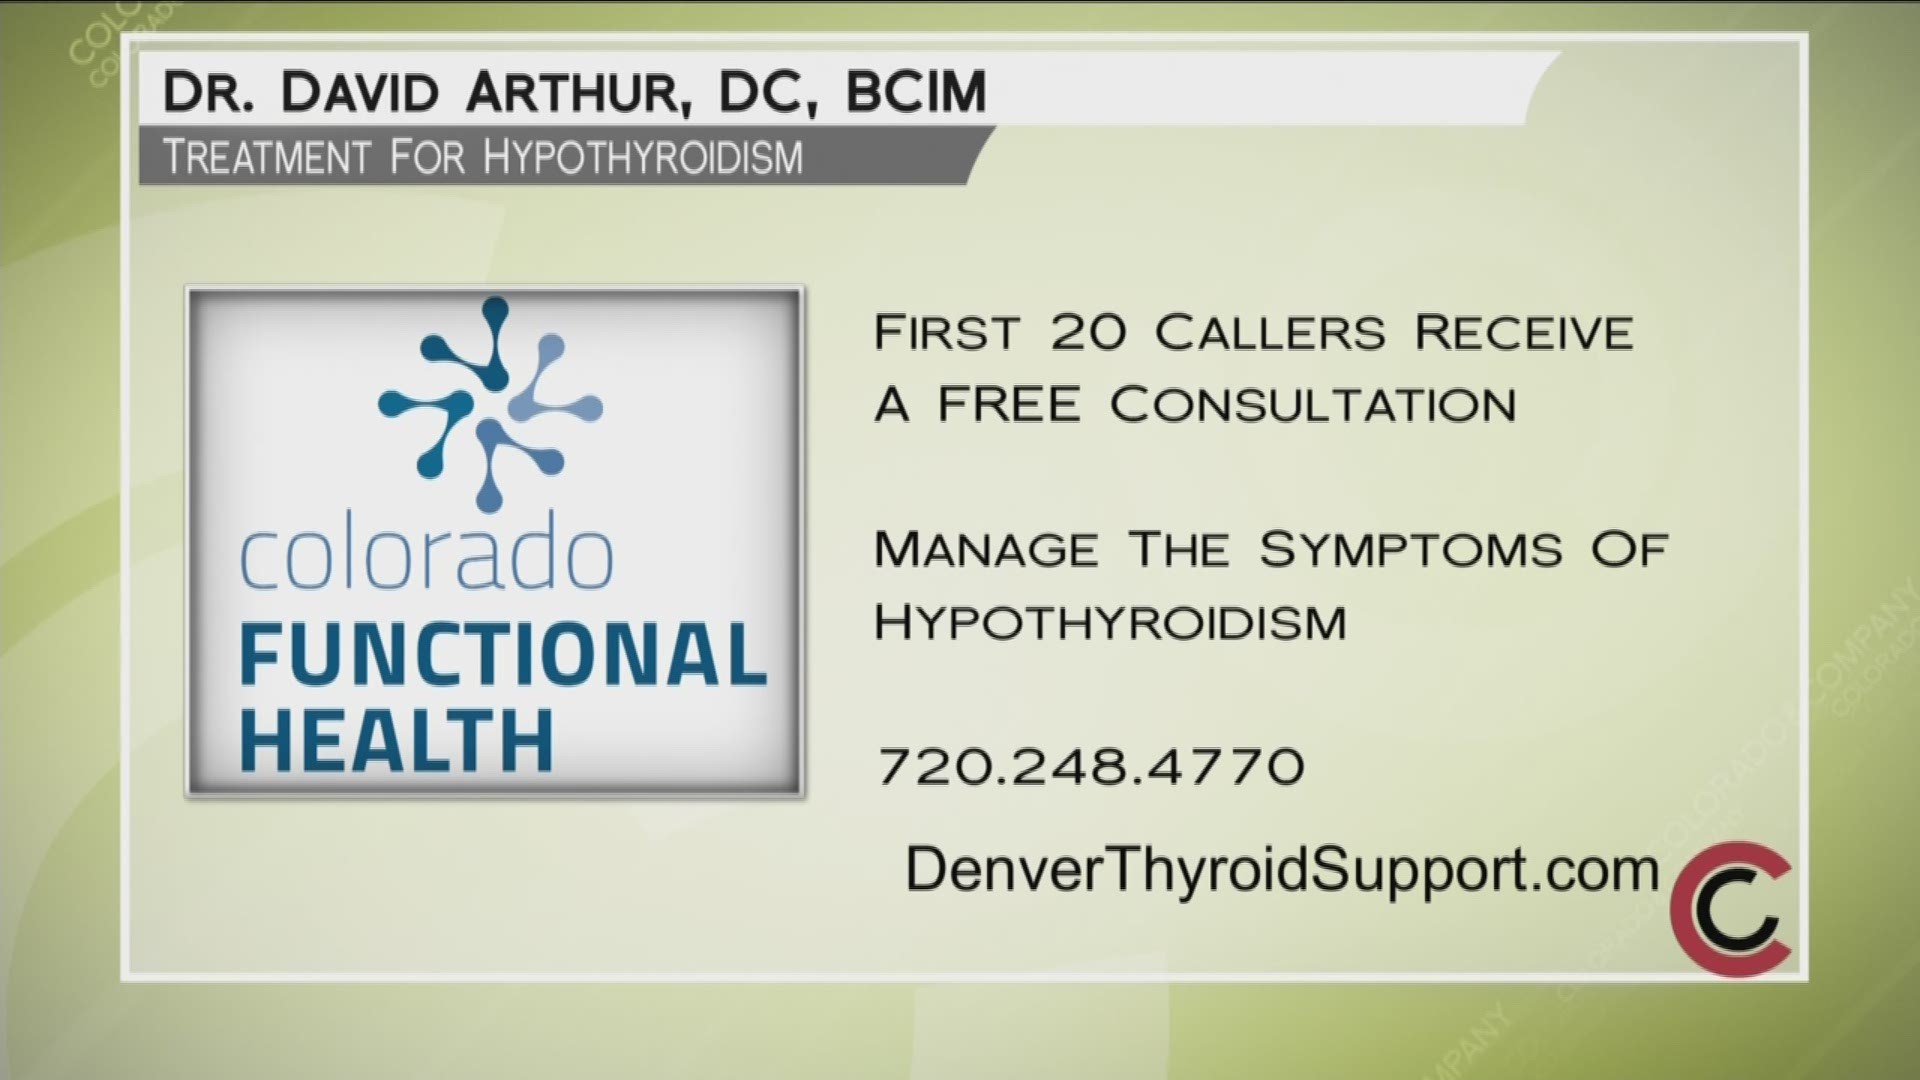 Dr. David Arthur has reserved 20 free initial consultations for the first 20 callers to 720.248.4770. This offer is for first-time callers who have been previously diagnosed, and are taking medication for low thyroid. Learn more at www.DenverThyroidSupport.com. 
THIS INTERVIEW HAS COMMERCIAL CONTENT. PRODUCTS AND SERVICES FEATURED APPEAR AS PAID ADVERTISING.